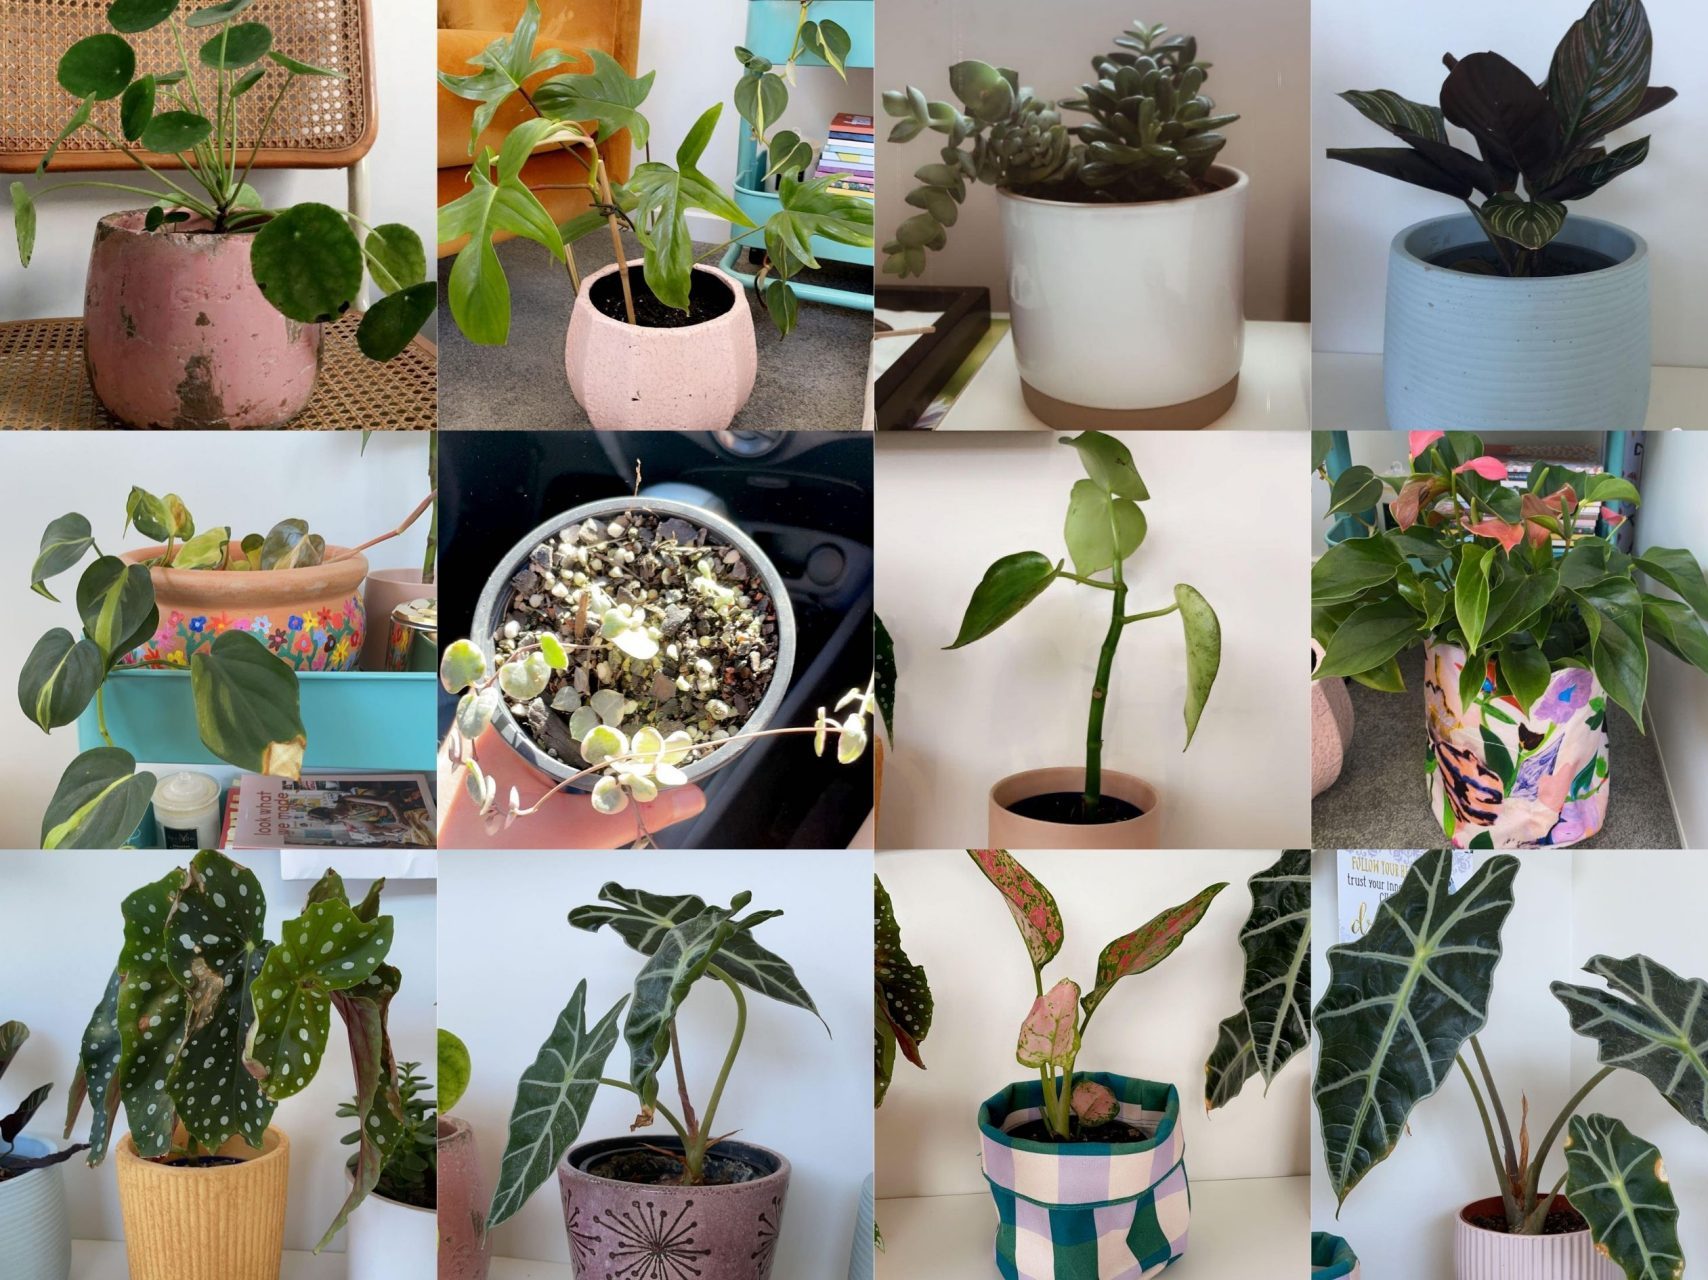 The Story of My Plants